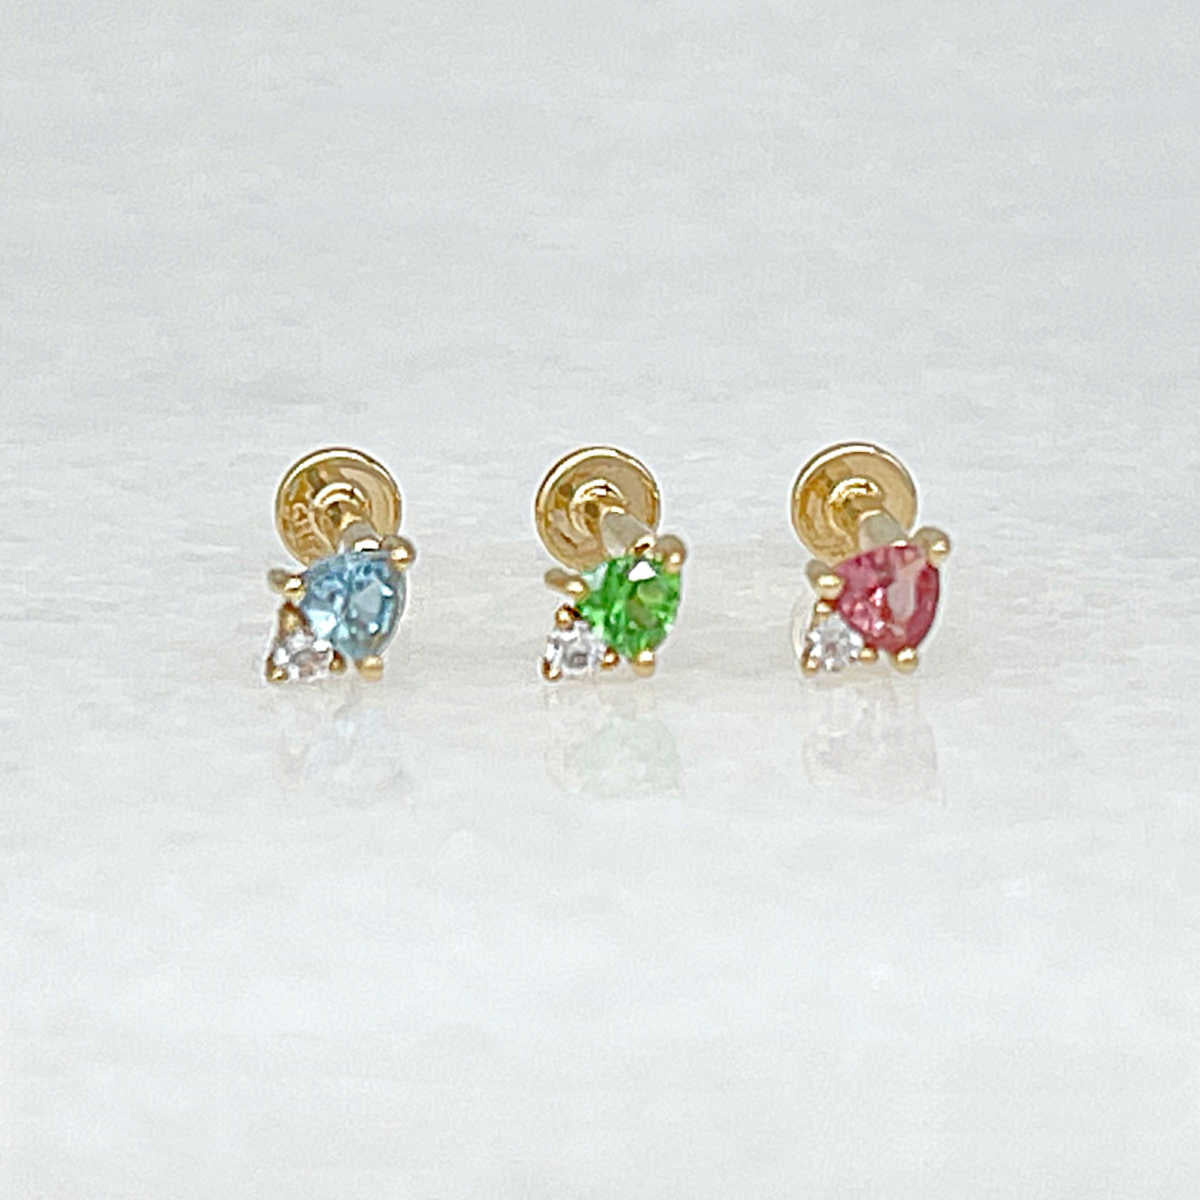 14k Gold & Gemstone Helix, Tragus, Conch Studs, Flat Back Earrings from Two of Most